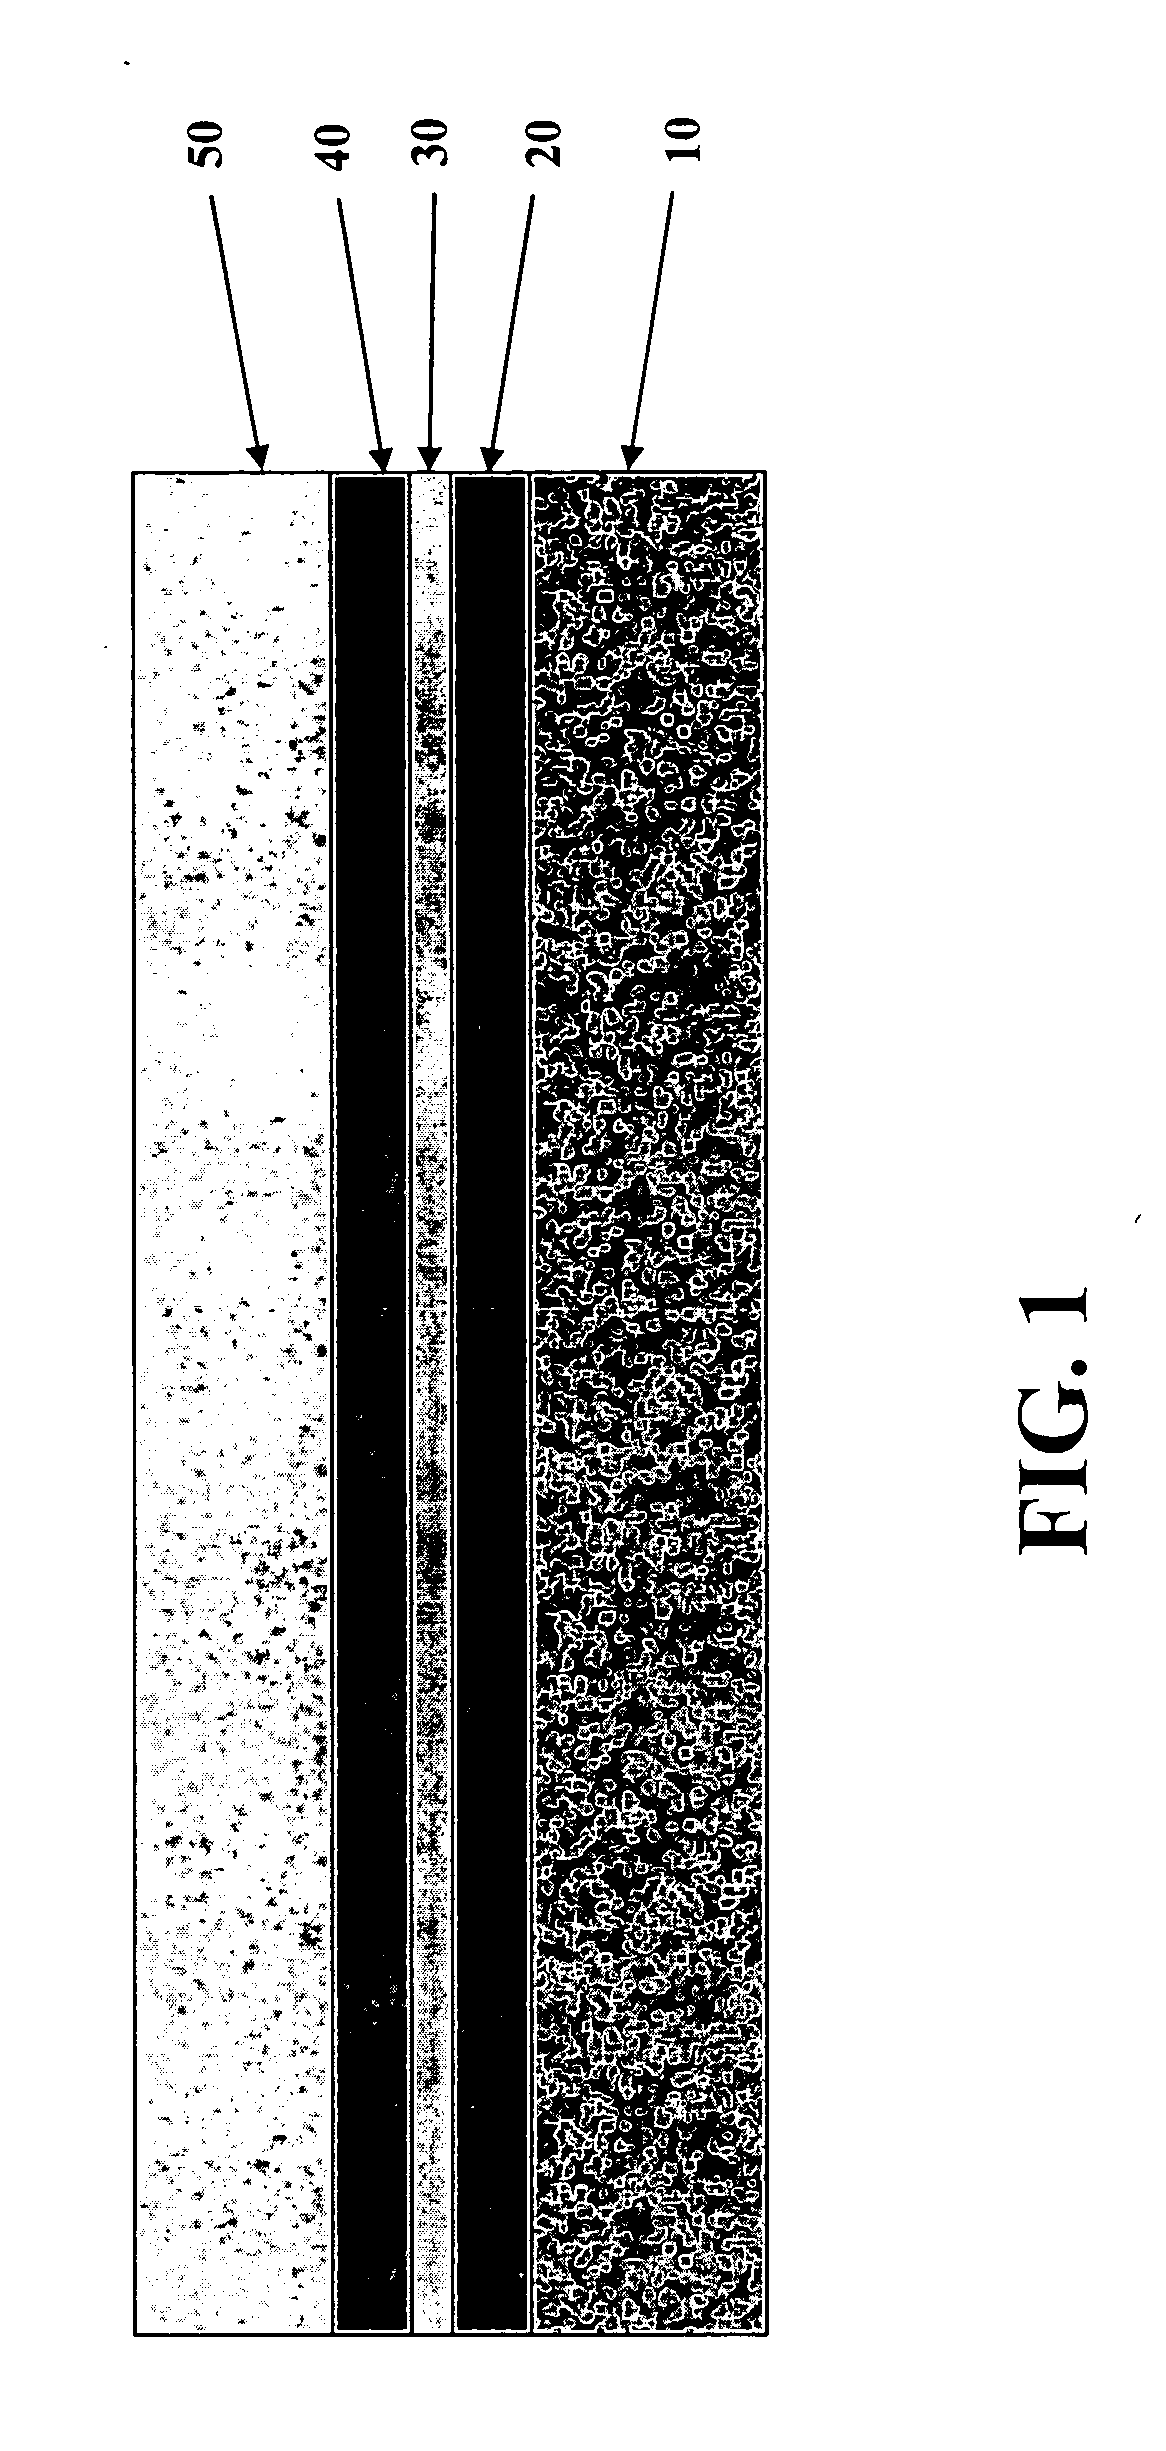 Noise-attenuating laminate composite wallboard panel and methods for manufacturing same